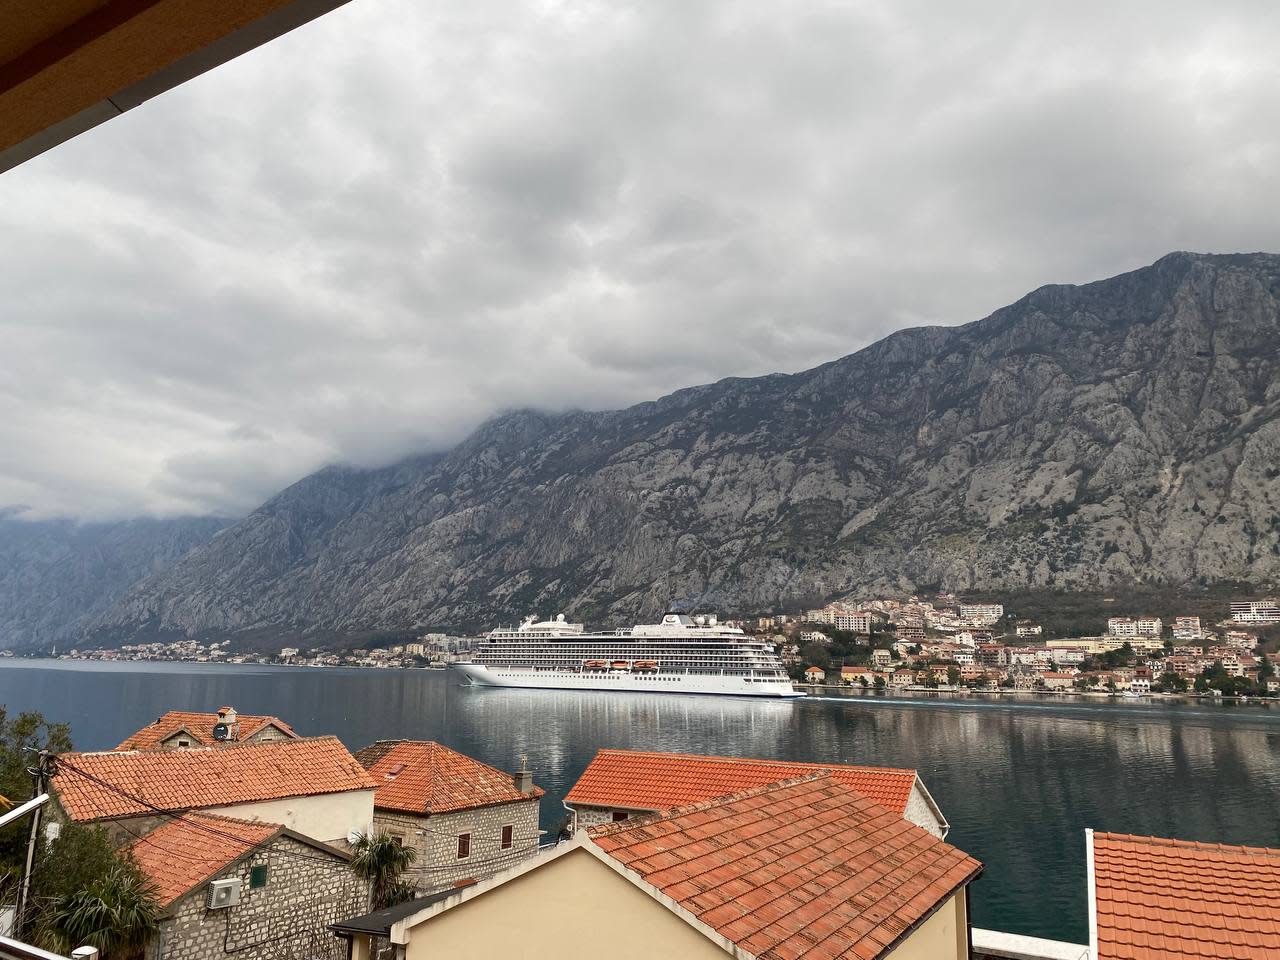 The view from hotel in Kotor, Montenegro